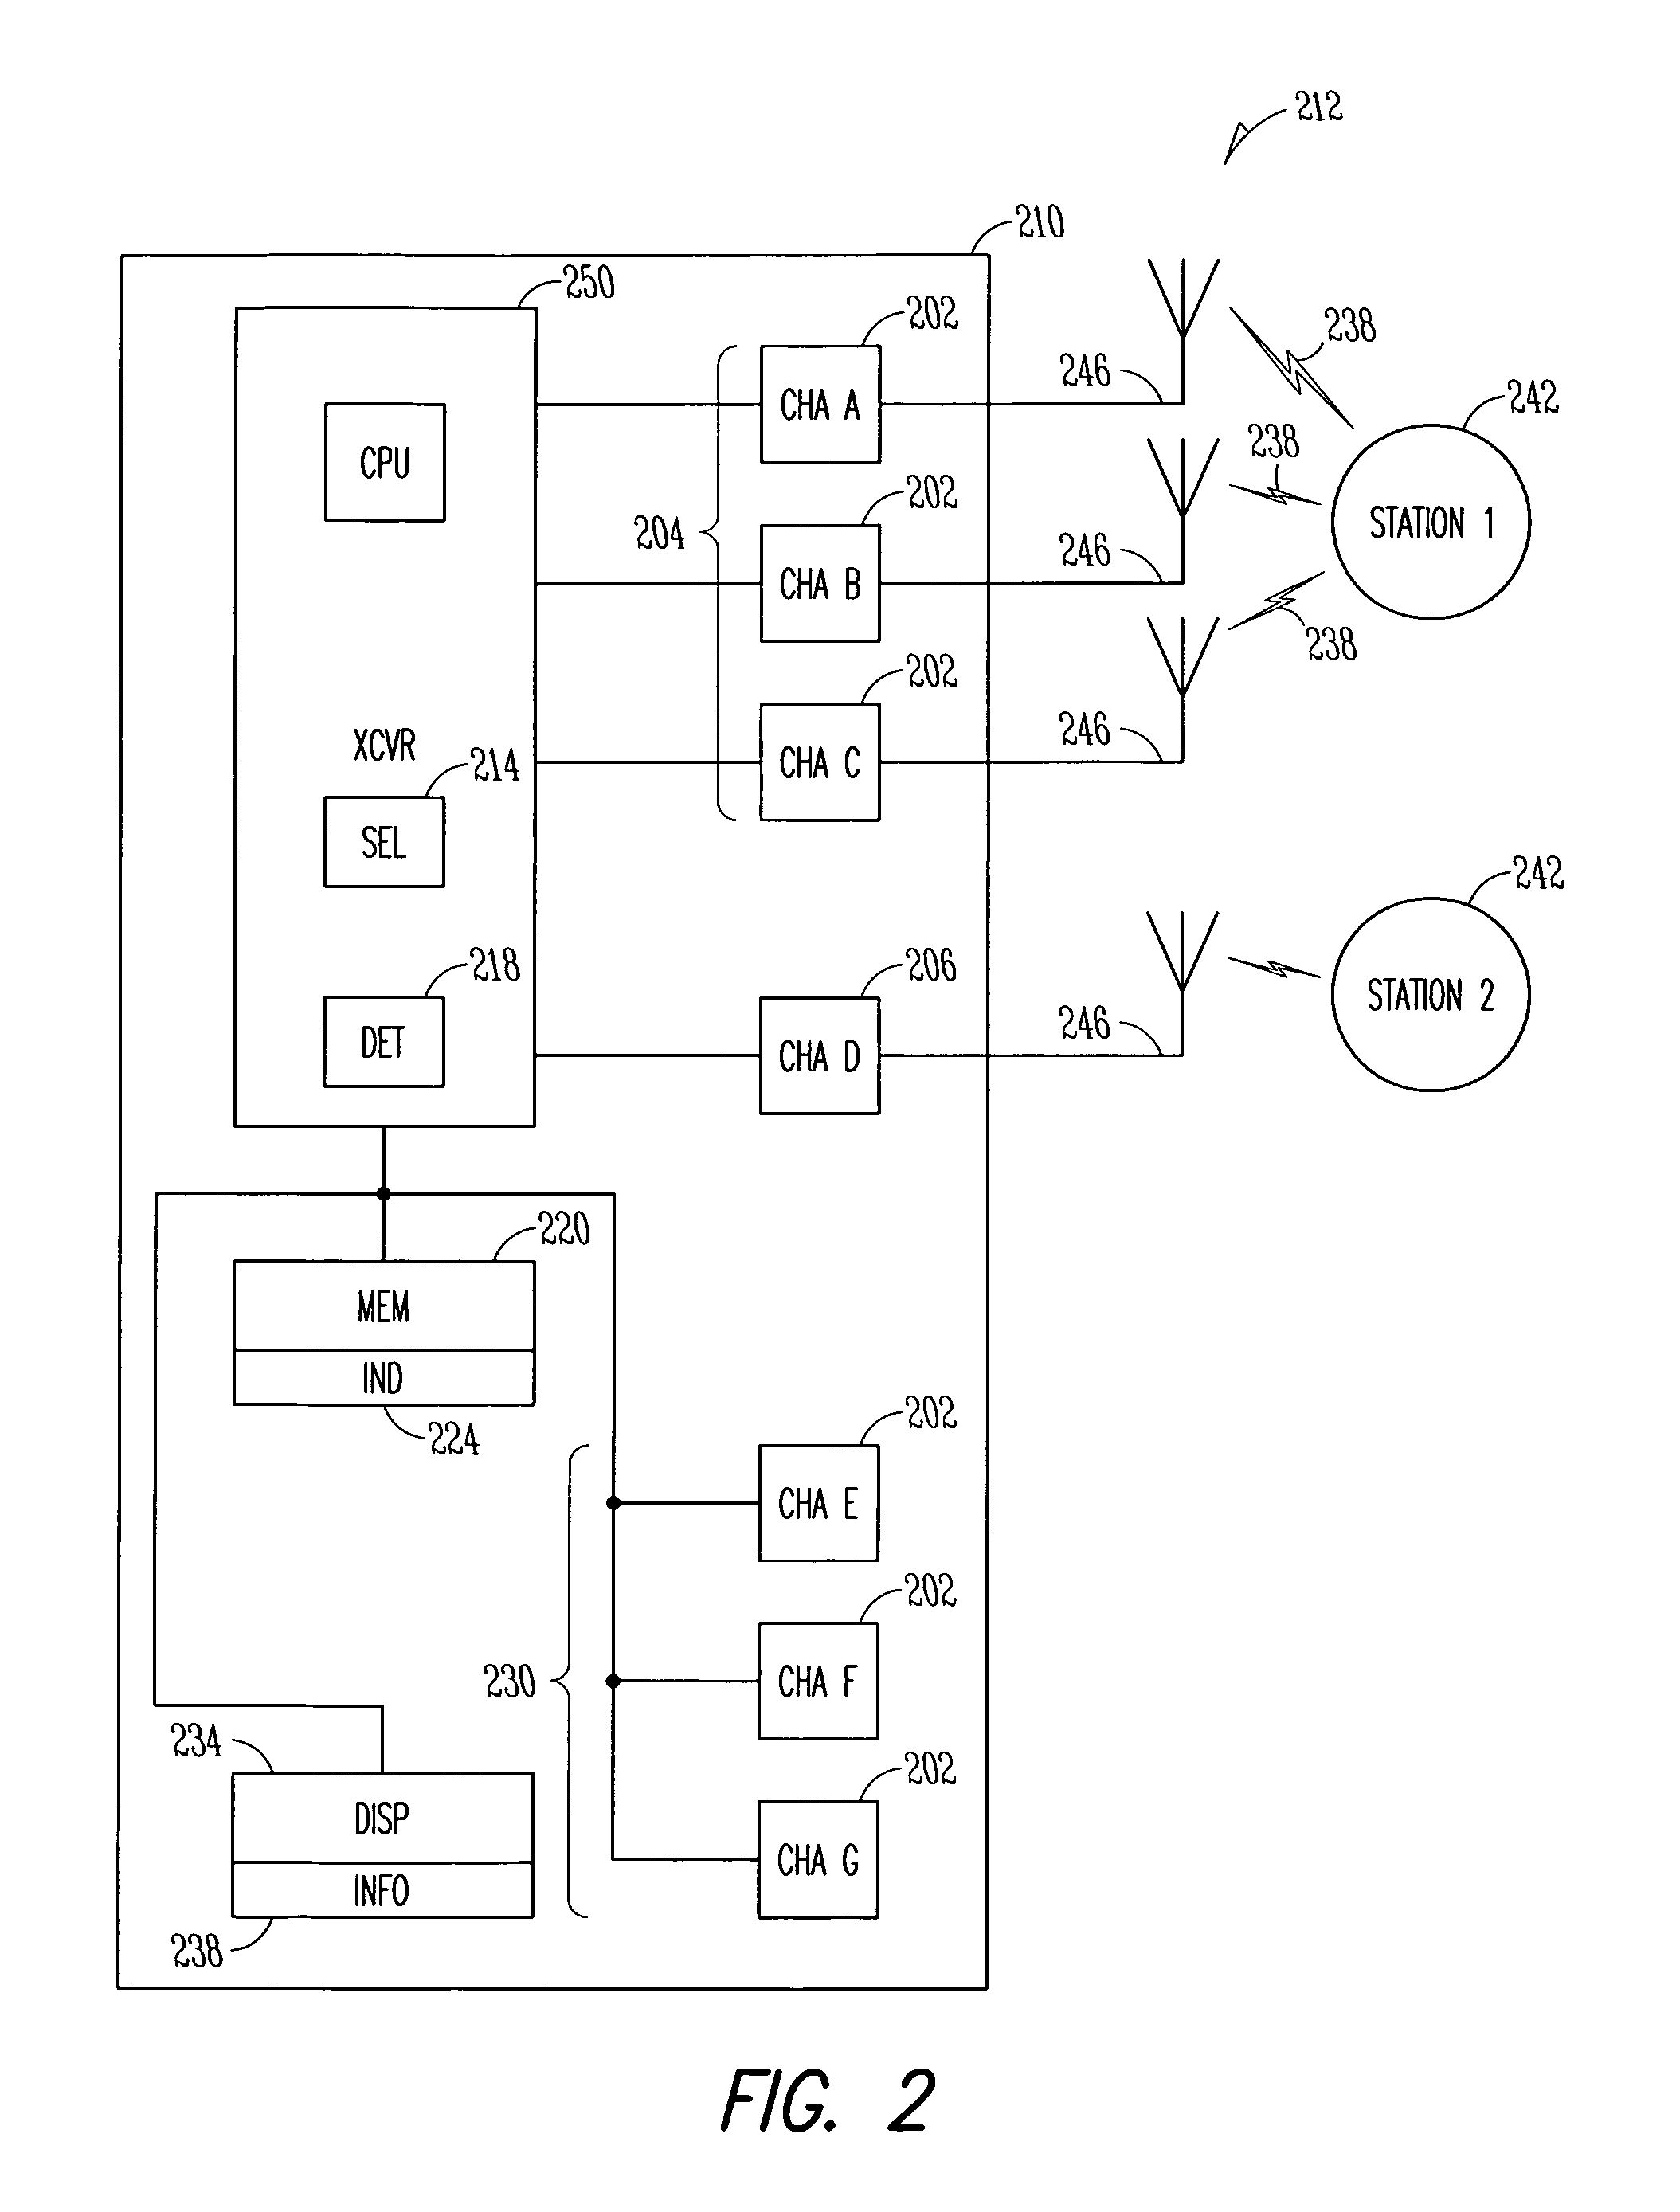 Channel specification apparatus, systems, and methods